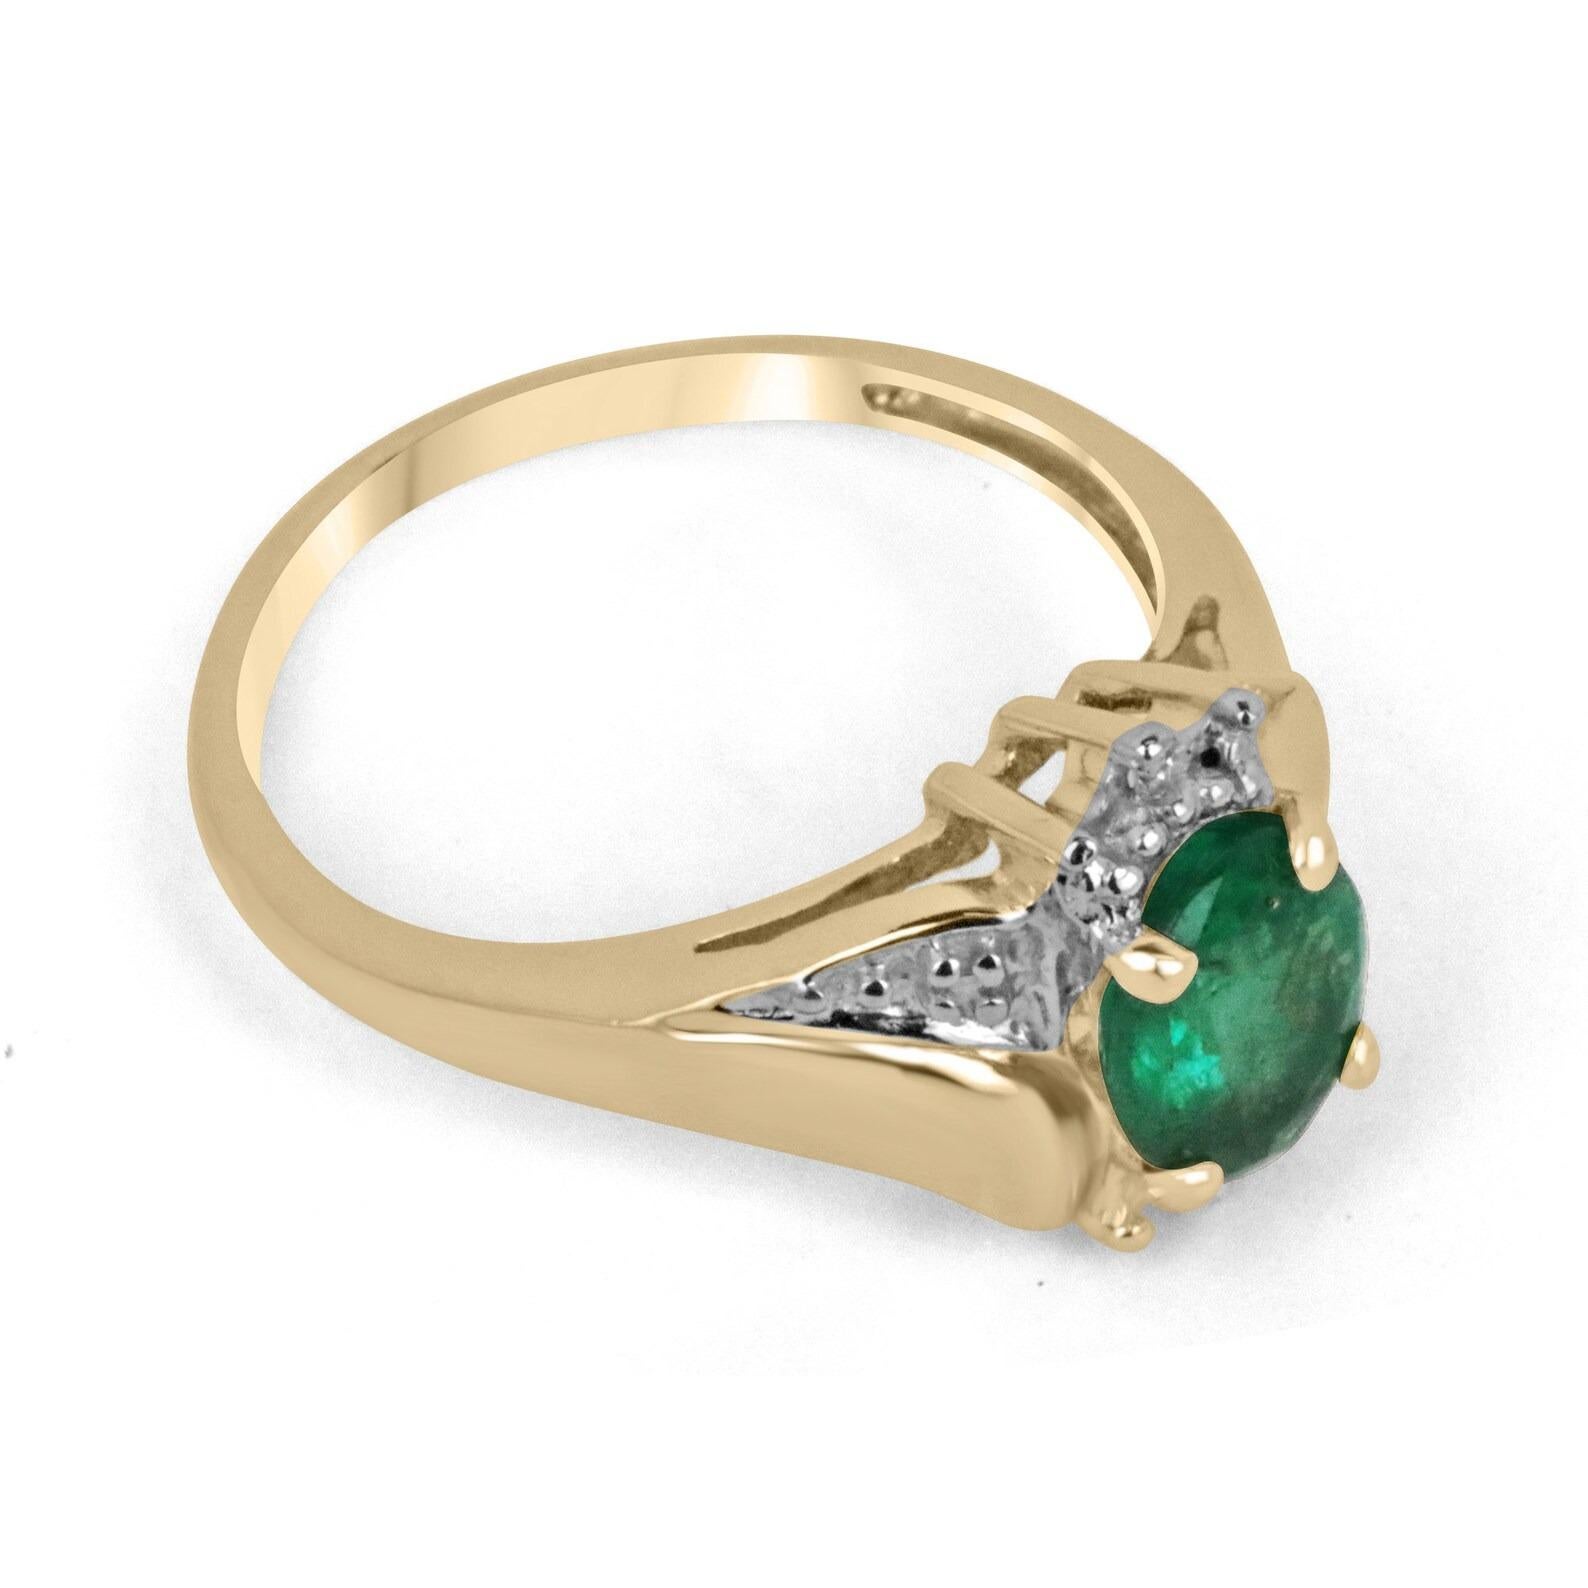 A stunning emerald and diamond accent ring. The center stone features a 1.74-carat, natural Zambian emerald, cut into the shape of an oval and displaying remarkable characteristics; such as desirable dark green color, good clarity with very good